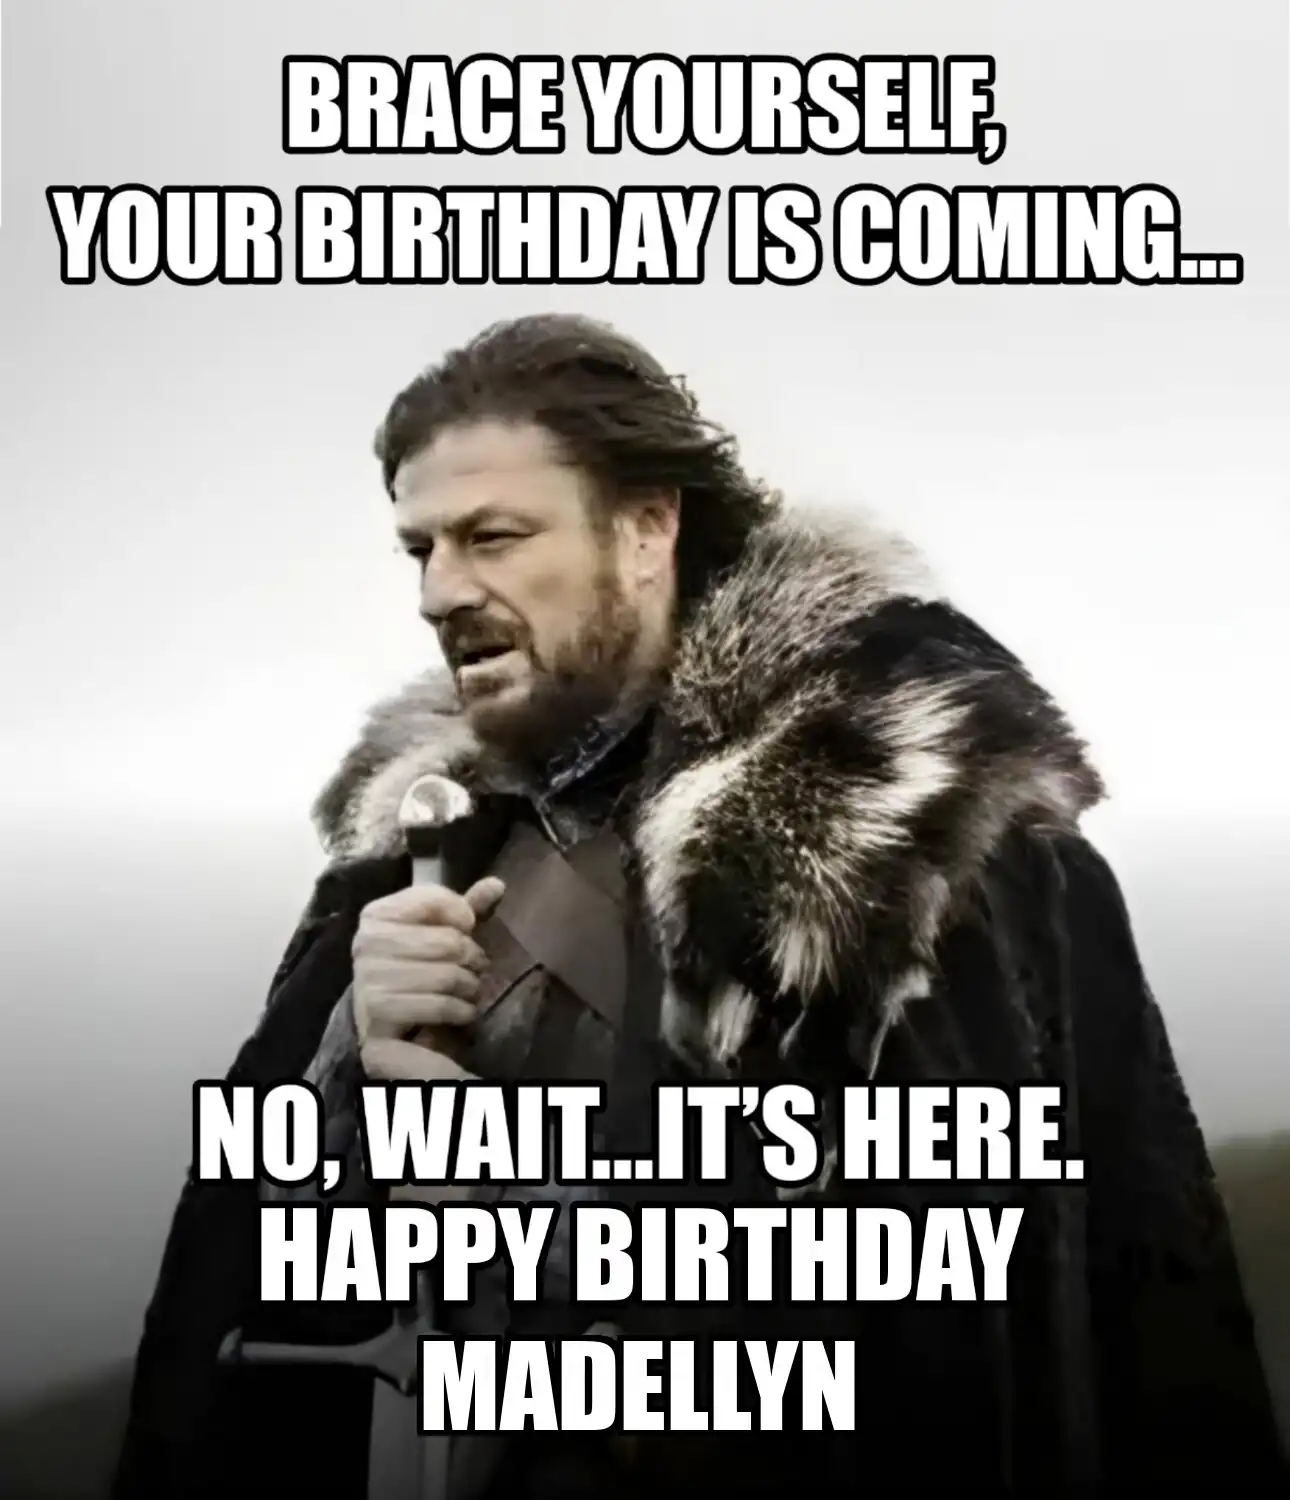 Happy Birthday Madellyn Brace Yourself Your Birthday Is Coming Meme